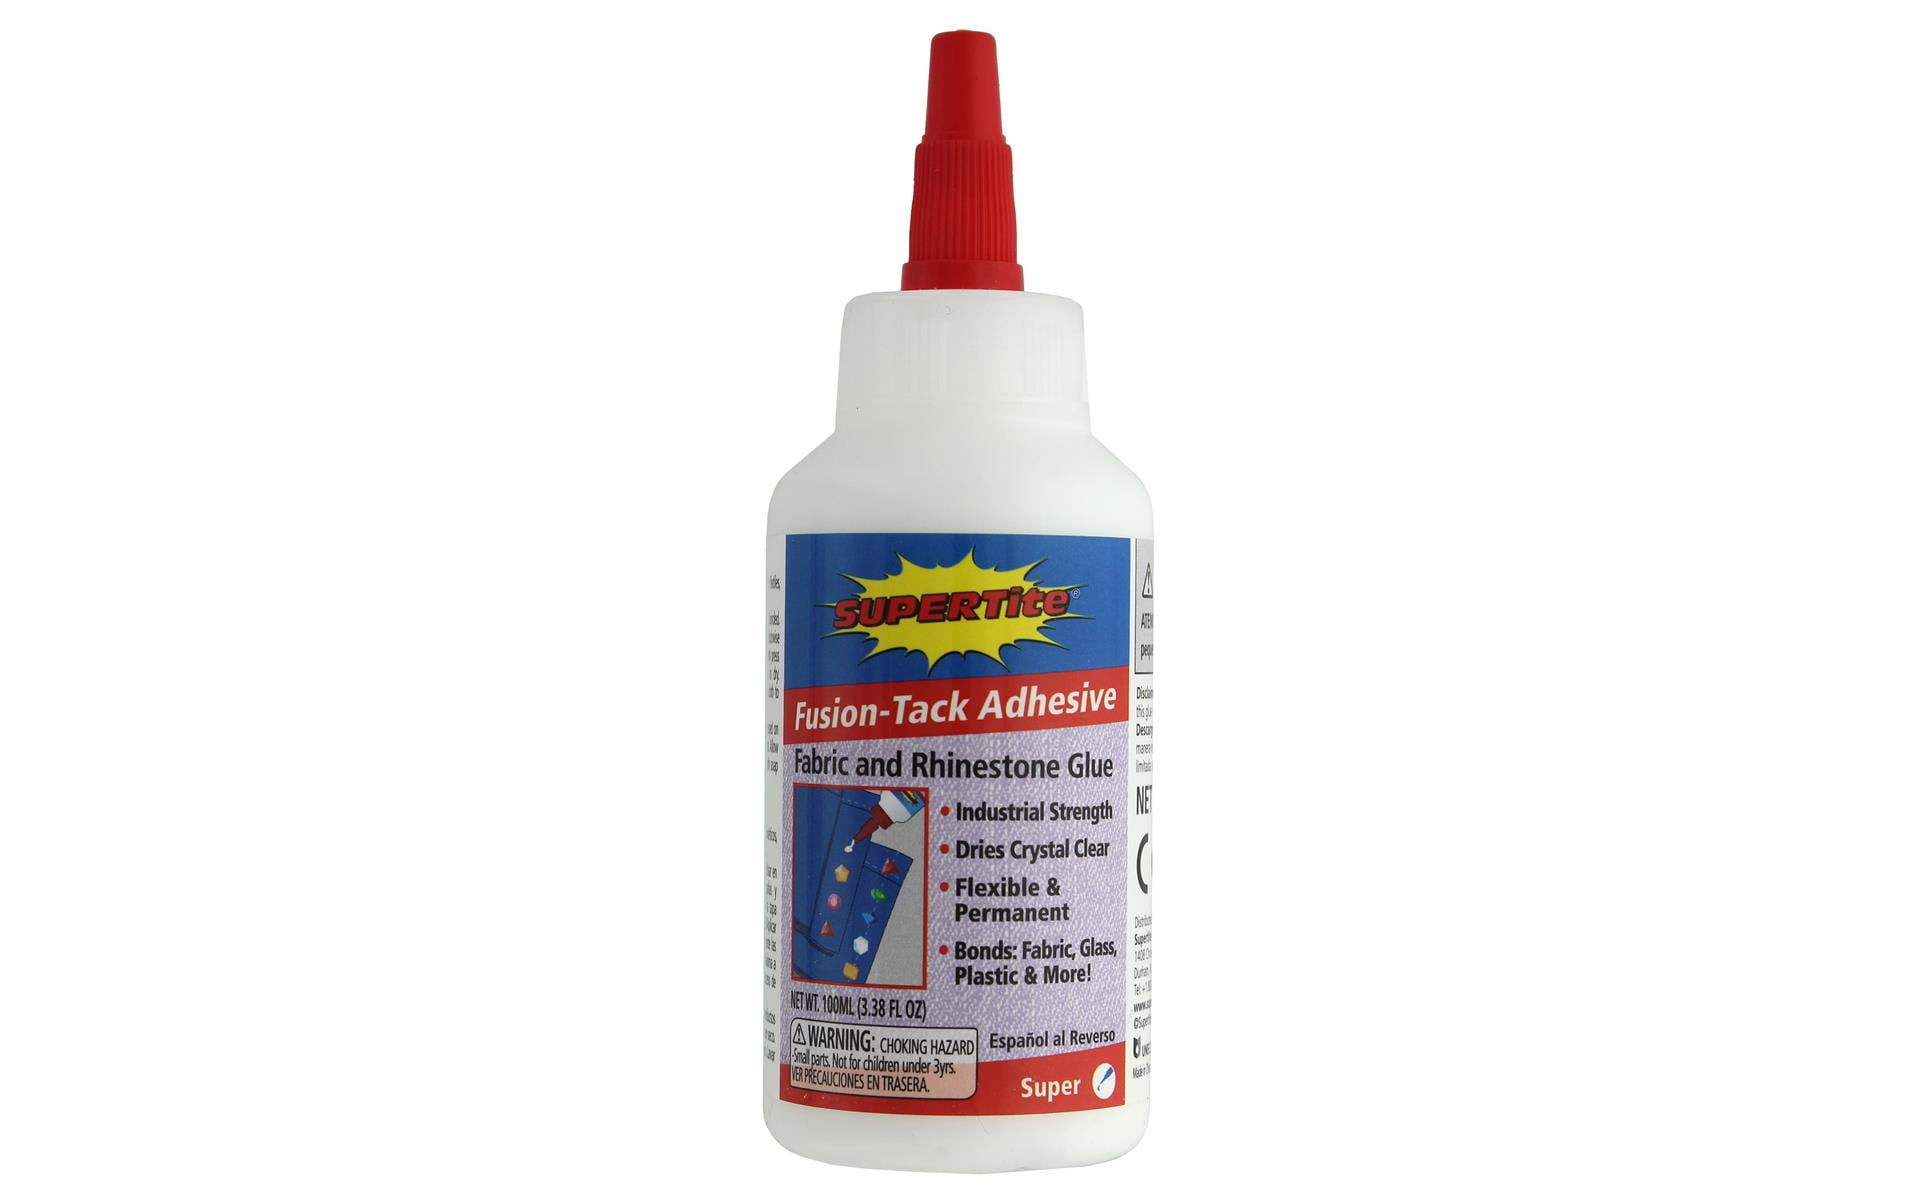 B7000 Craft Glue For Jewelry Making - Multi-Function B-7000 Super Adhesive  Glues Liquid Fusion Glue For Rhinestones Crafts, Clothes Shoes, Fabric